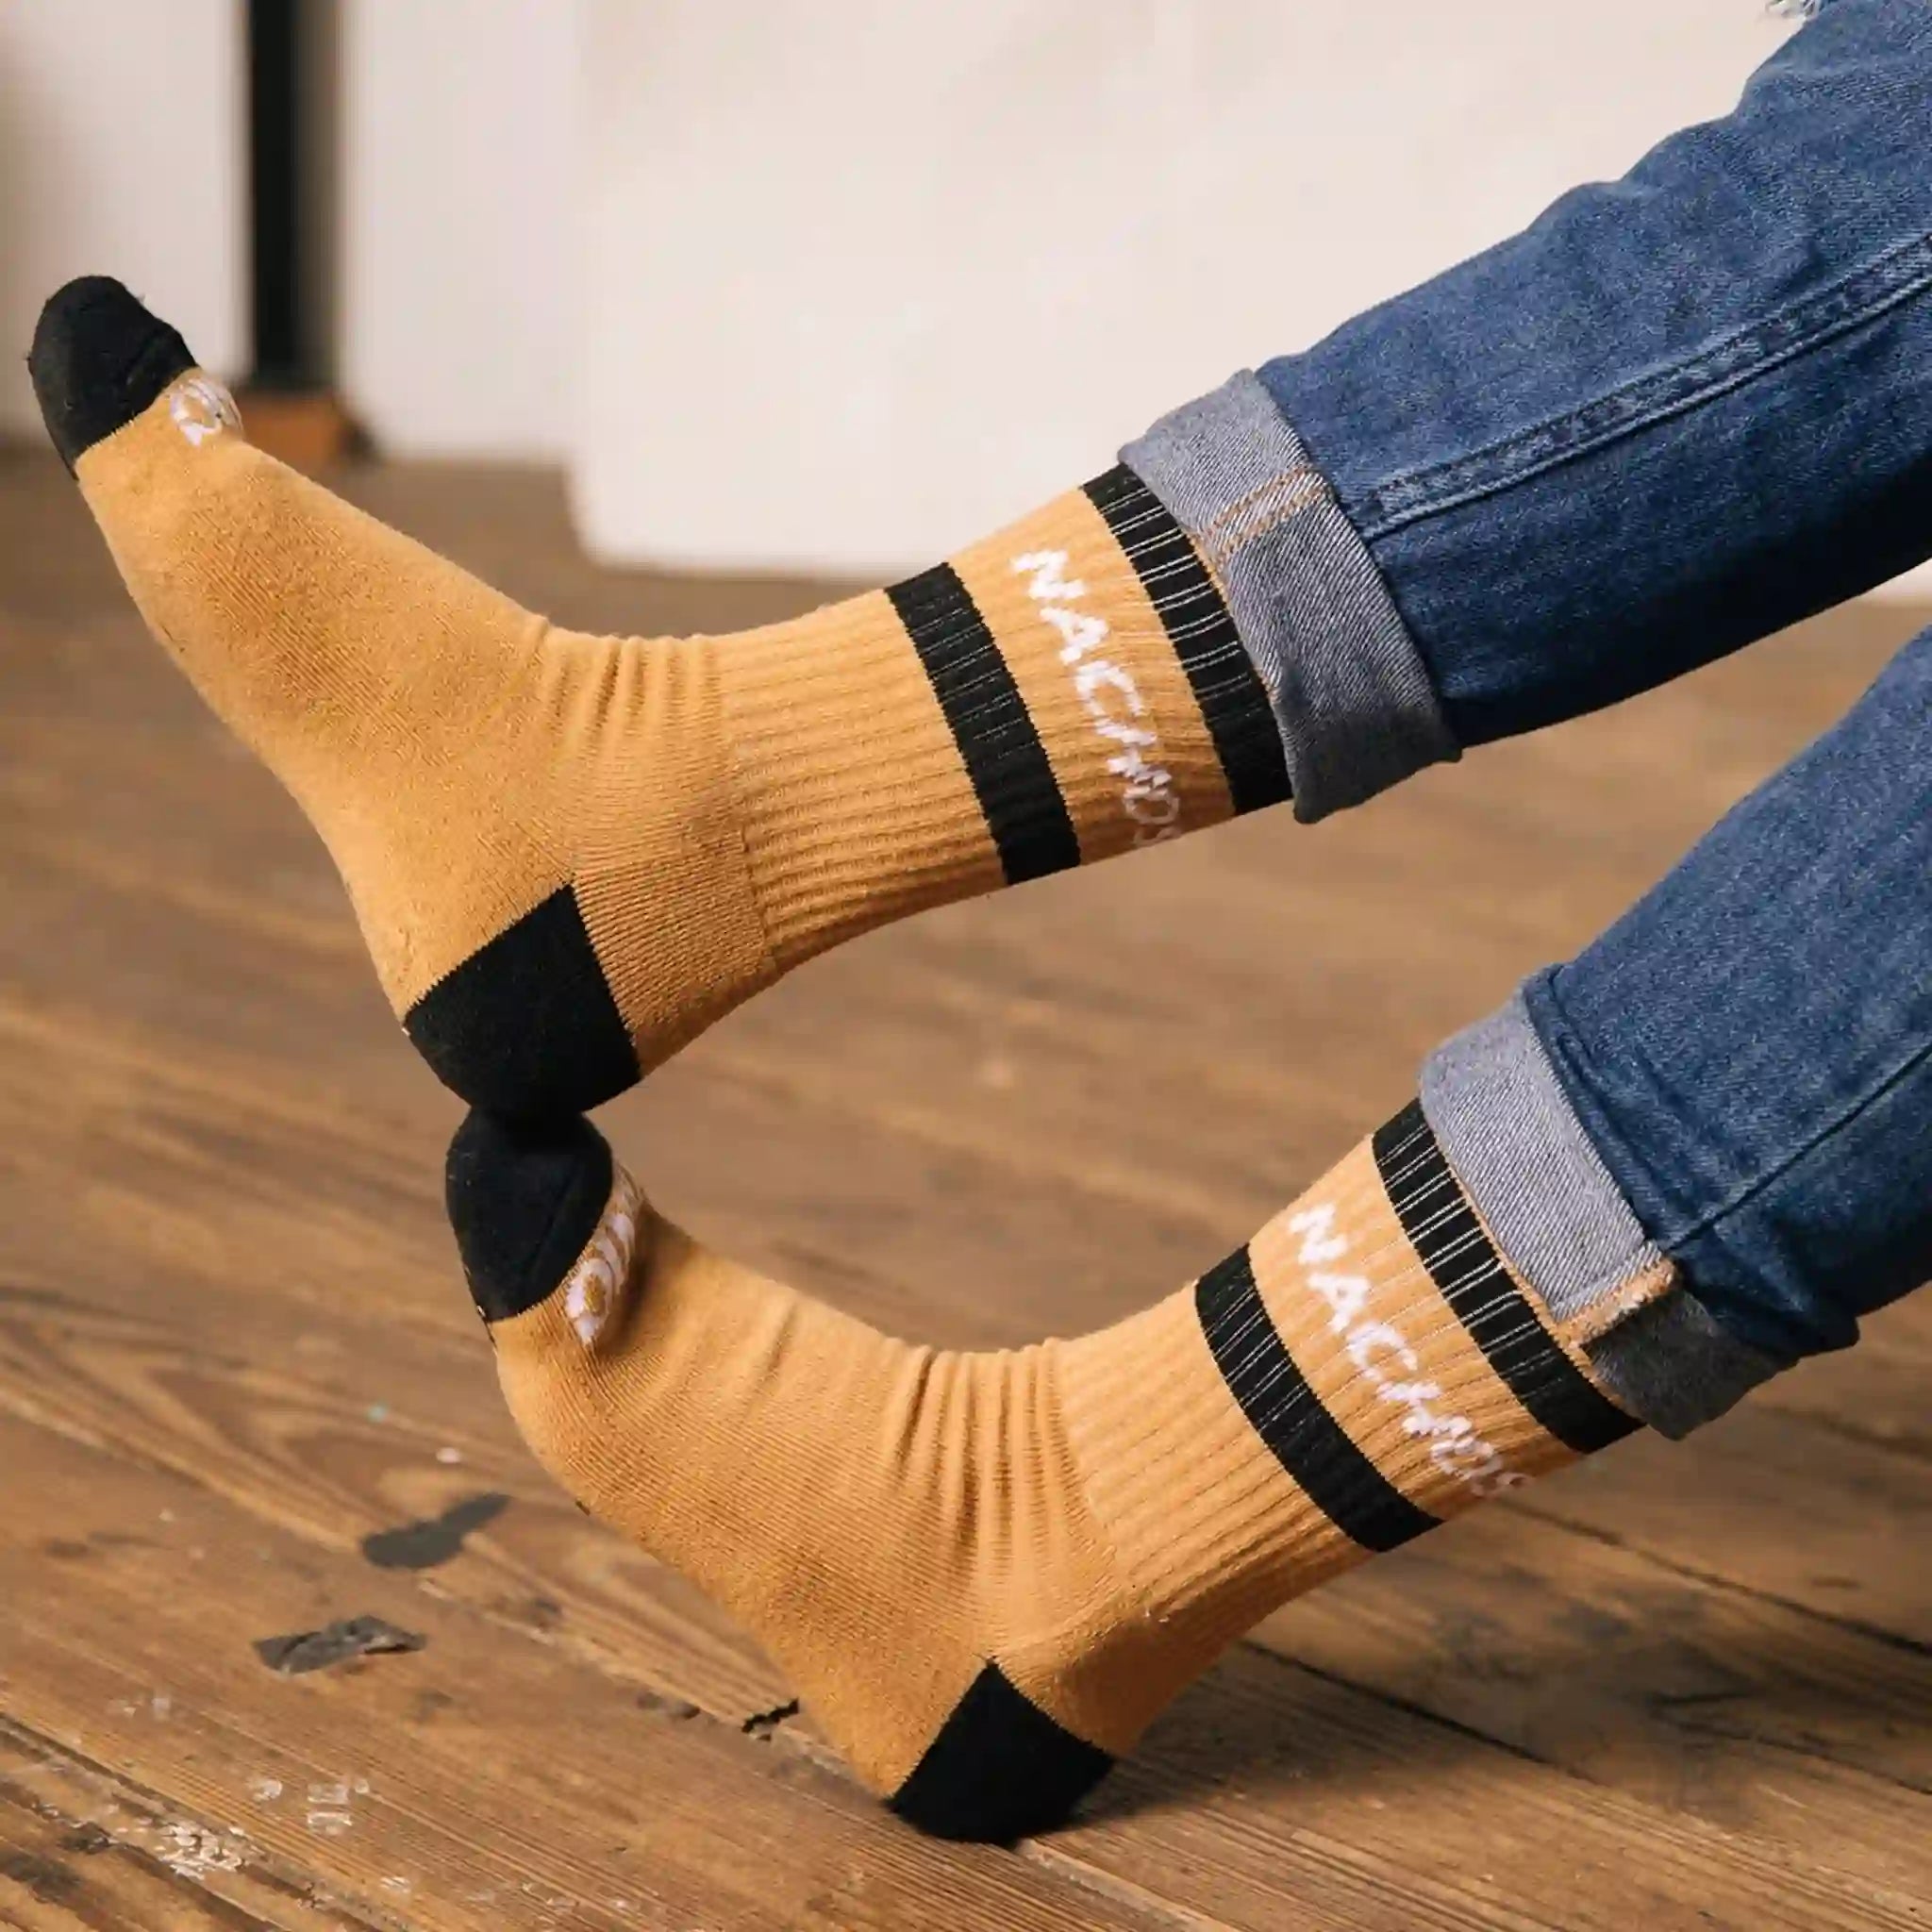 Tan crew socks with black detailing and two black stripes across the top and says &quot;Nachos&quot; in white text.